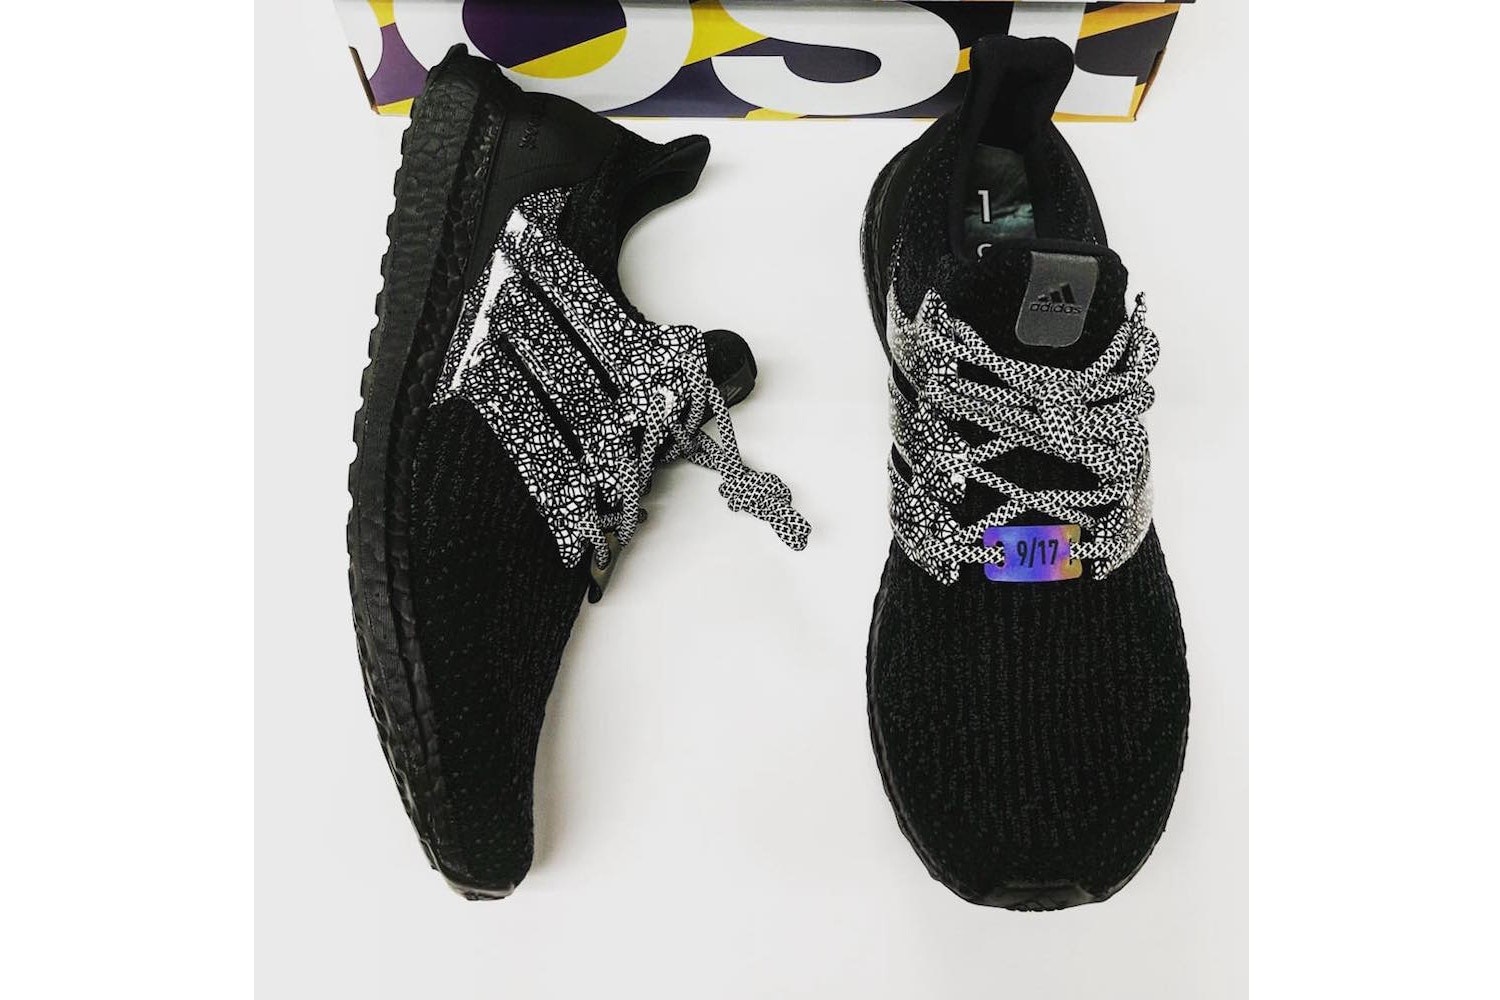 Concepts x adidas UltraBOOST 3.0 Friends & Family